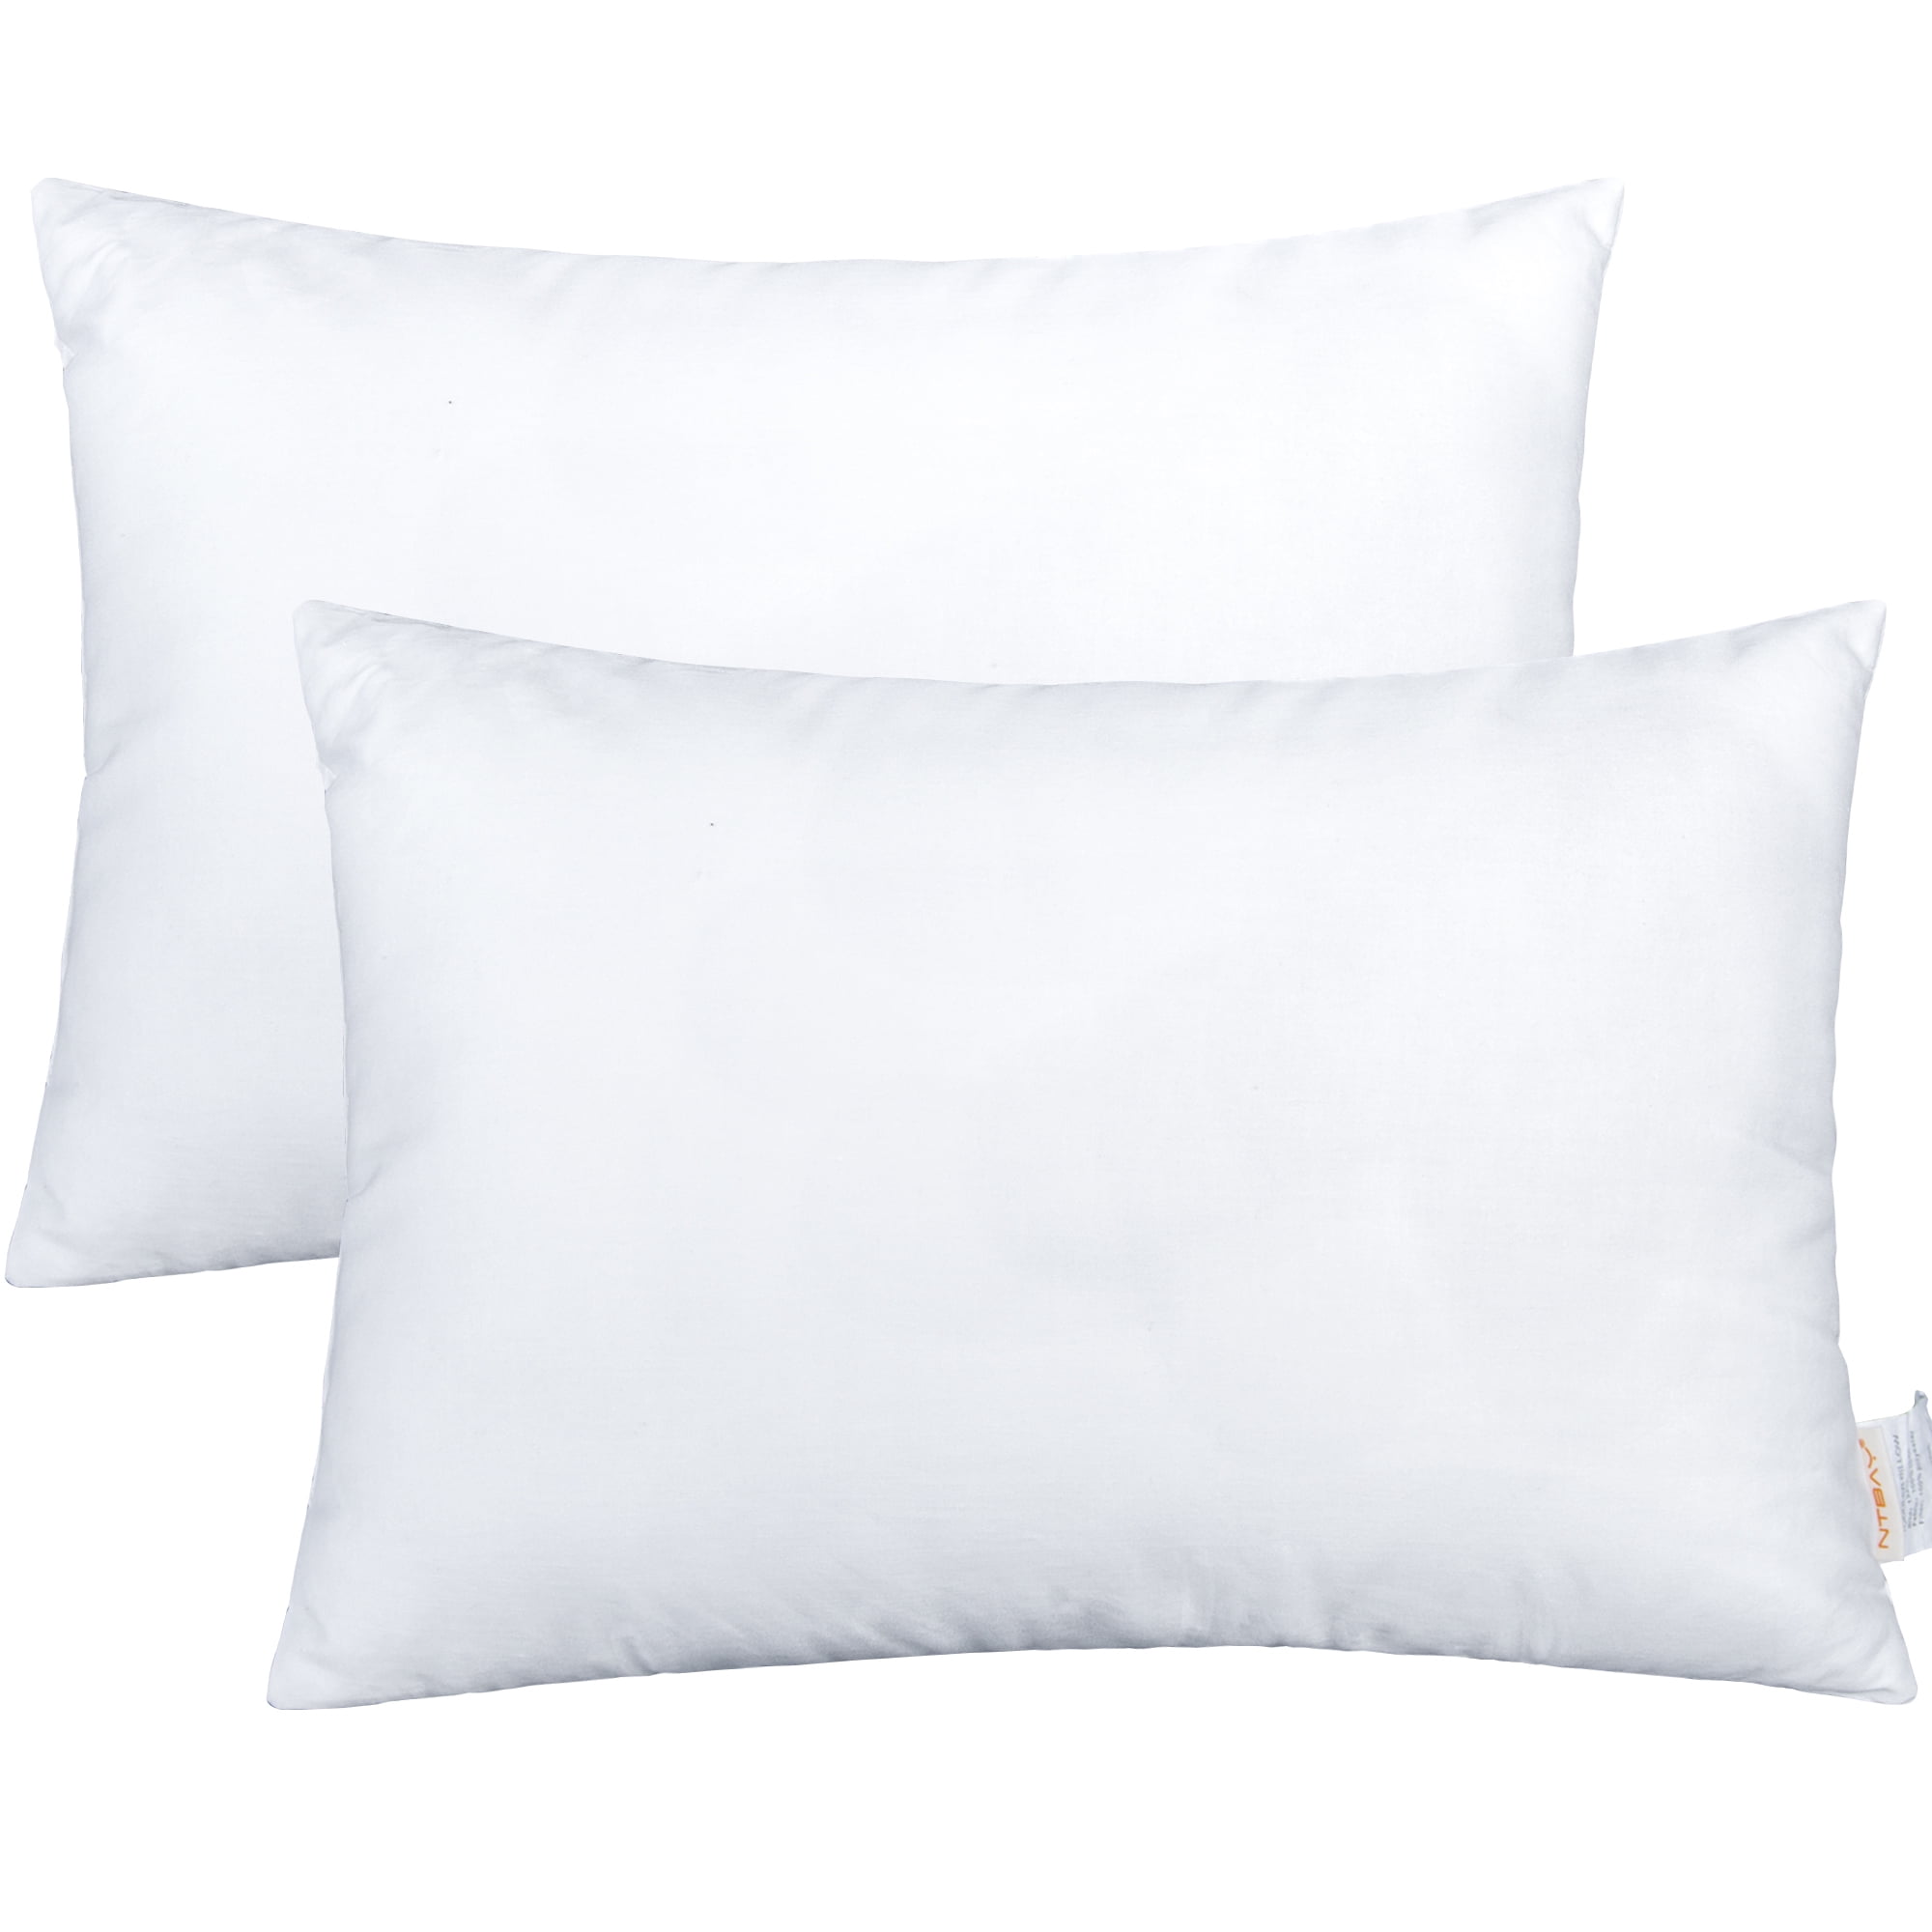 Moonsea Toddler Pillow with Cotton Pillowcase 2 Pack White, Small Pillows  for Sleeping Ultra Soft, 13 x 18 Inches Kids Pillows for Sleeping Fits